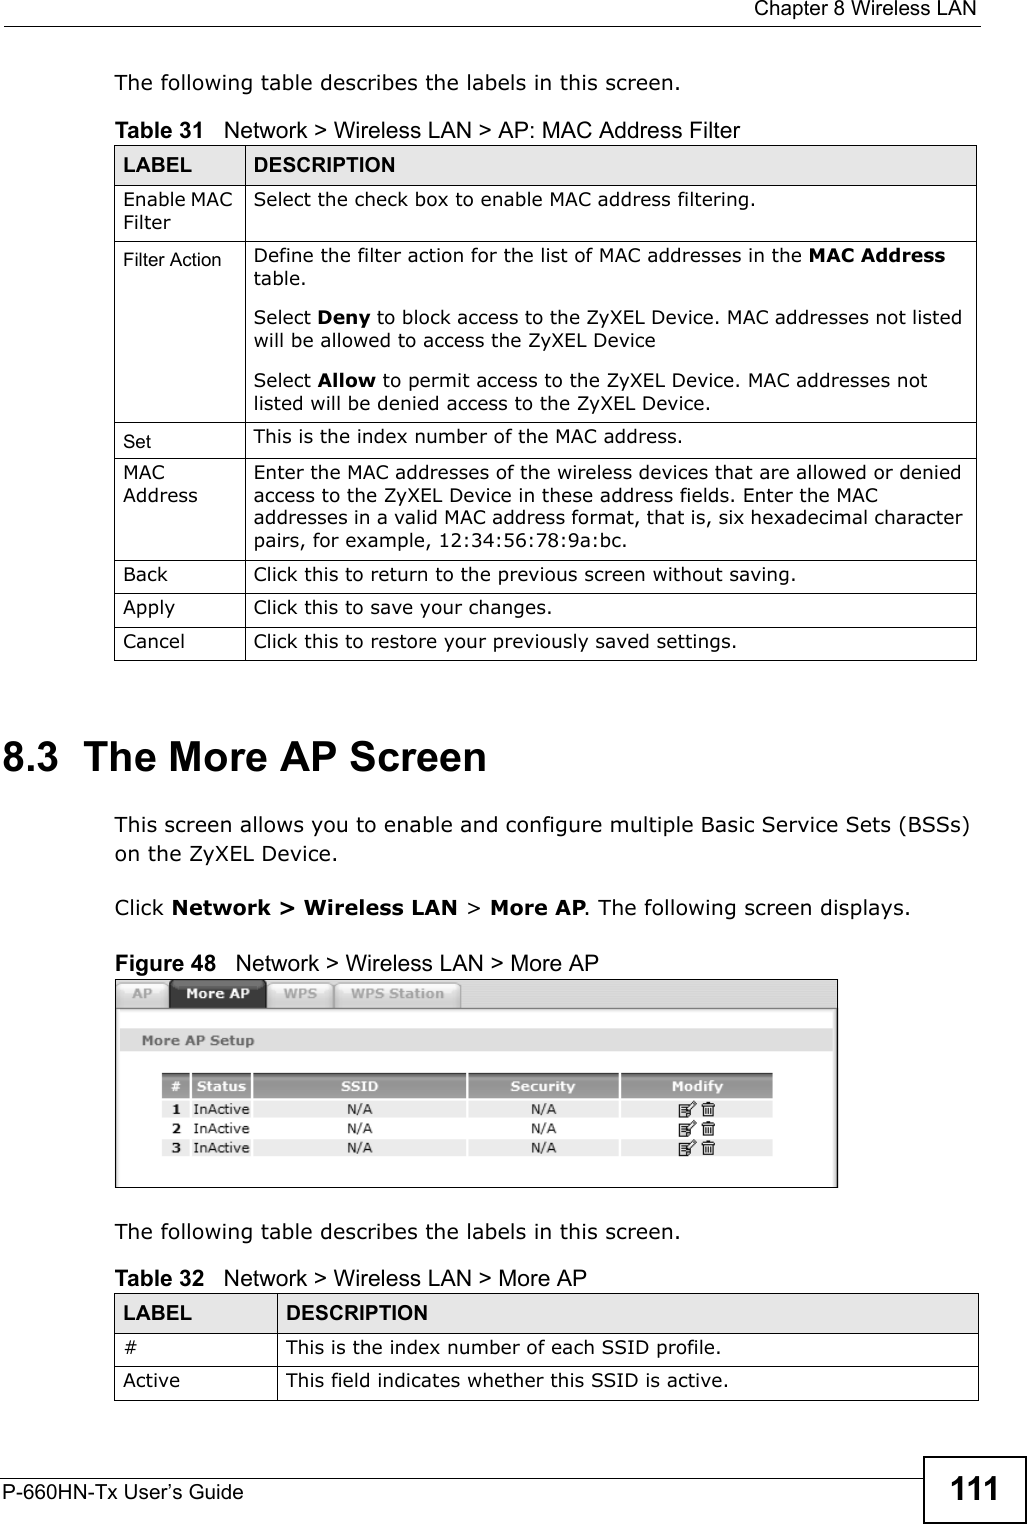  Chapter 8 Wireless LANP-660HN-Tx User’s Guide 111The following table describes the labels in this screen.8.3  The More AP ScreenThis screen allows you to enable and configure multiple Basic Service Sets (BSSs) on the ZyXEL Device.Click Network &gt; Wireless LAN &gt; More AP. The following screen displays.Figure 48   Network &gt; Wireless LAN &gt; More APThe following table describes the labels in this screen.Table 31   Network &gt; Wireless LAN &gt; AP: MAC Address FilterLABEL DESCRIPTIONEnable MAC FilterSelect the check box to enable MAC address filtering.Filter Action  Define the filter action for the list of MAC addresses in the MAC Address table. Select Deny to block access to the ZyXEL Device. MAC addresses not listed will be allowed to access the ZyXEL Device Select Allow to permit access to the ZyXEL Device. MAC addresses not listed will be denied access to the ZyXEL Device. Set This is the index number of the MAC address.MAC AddressEnter the MAC addresses of the wireless devices that are allowed or denied access to the ZyXEL Device in these address fields. Enter the MAC addresses in a valid MAC address format, that is, six hexadecimal character pairs, for example, 12:34:56:78:9a:bc.Back Click this to return to the previous screen without saving.Apply Click this to save your changes.Cancel Click this to restore your previously saved settings.Table 32   Network &gt; Wireless LAN &gt; More APLABEL DESCRIPTION# This is the index number of each SSID profile. Active This field indicates whether this SSID is active. 